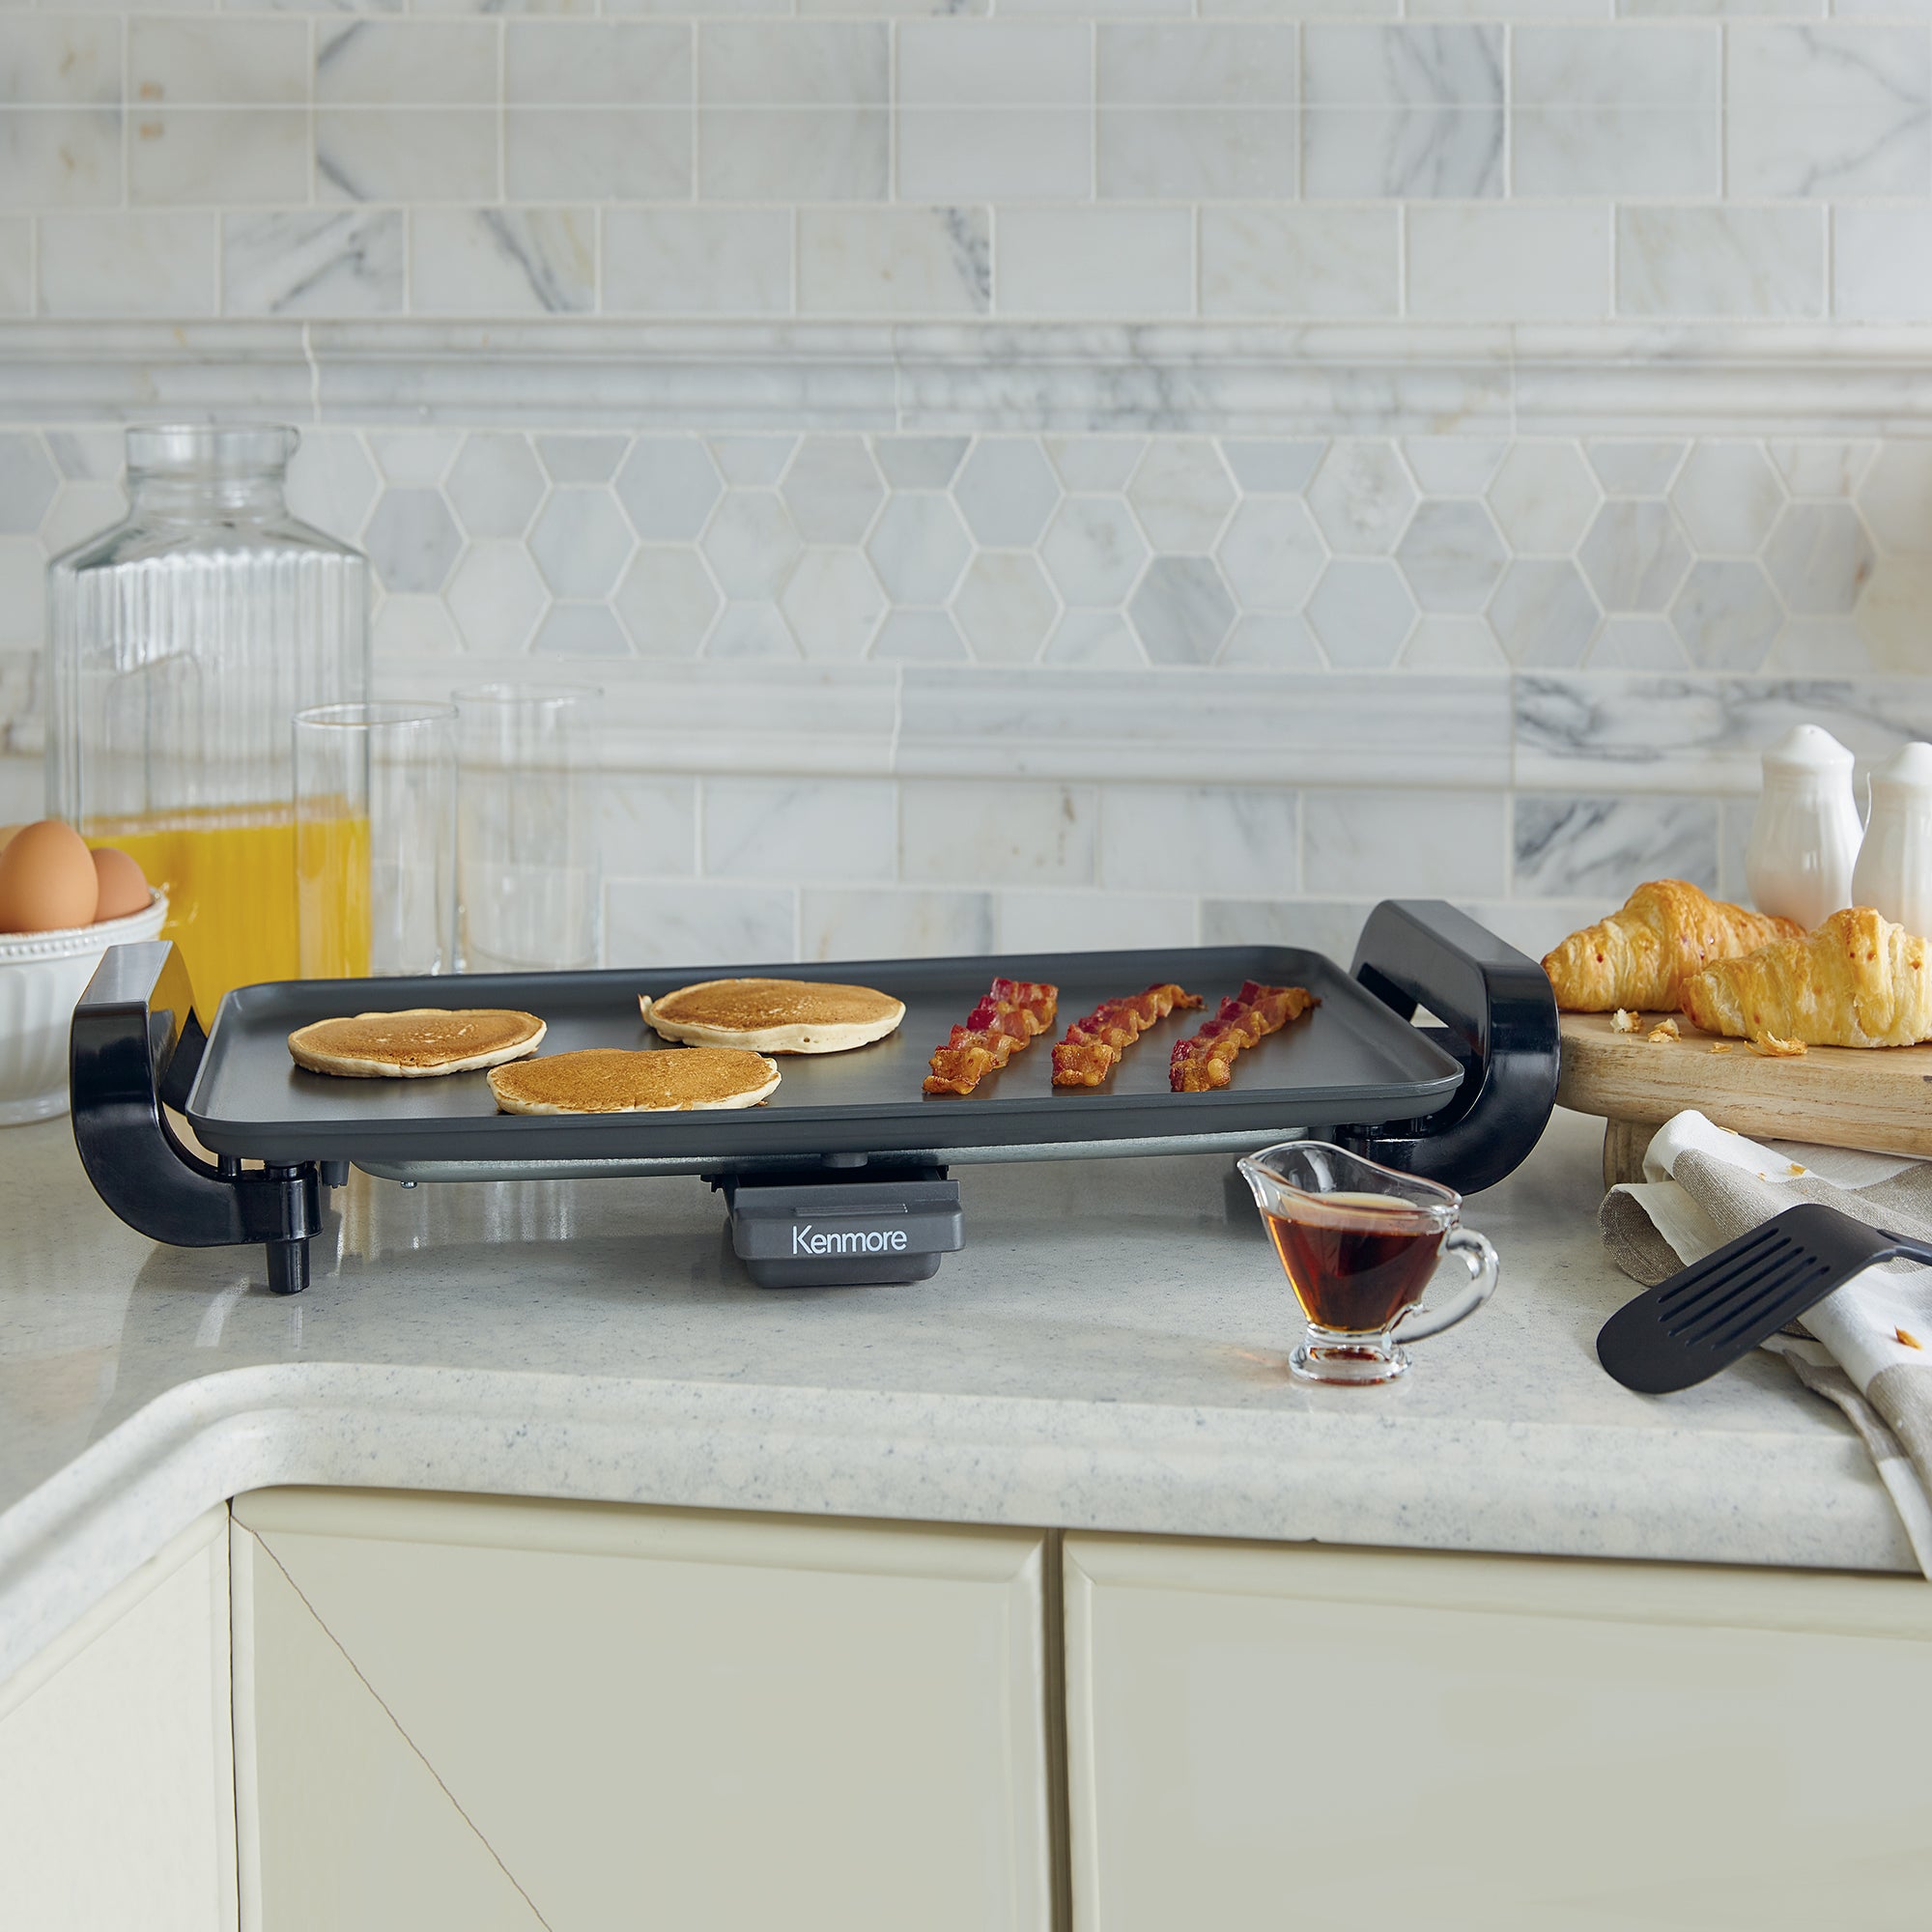 Kenmore non-stick electric griddle with pancakes and bacon cooking on a white countertop with light gray tile backsplash behind and orange juice, brown eggs, croissants, a small glass container of syrup, and a spatula arranged around it